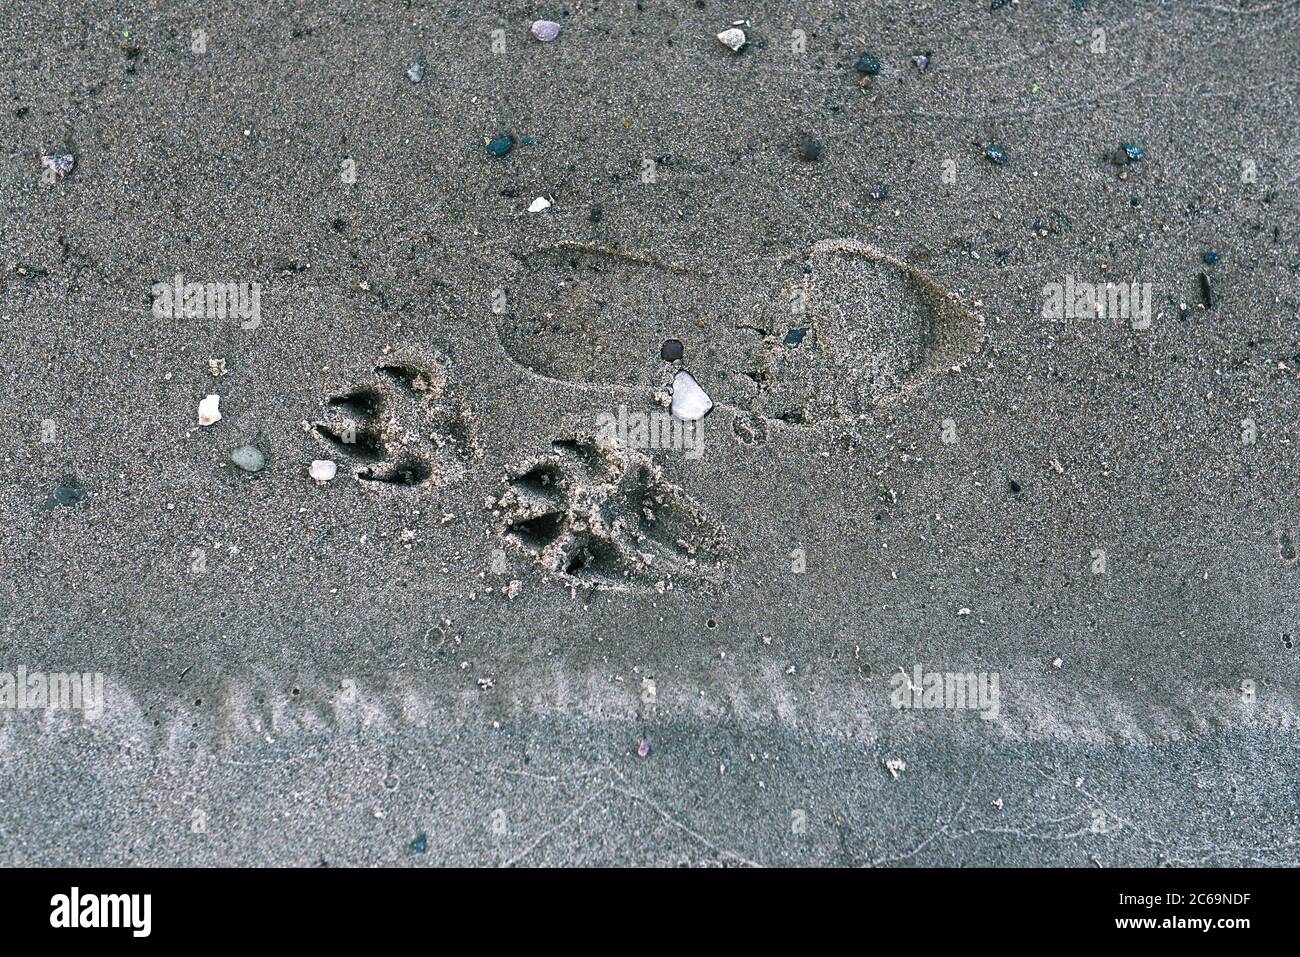 The trail of a man and an animal on the beach. A dog's paw print on the sand and a man's feet. The texture of sand and footprints on the shoreline Stock Photo